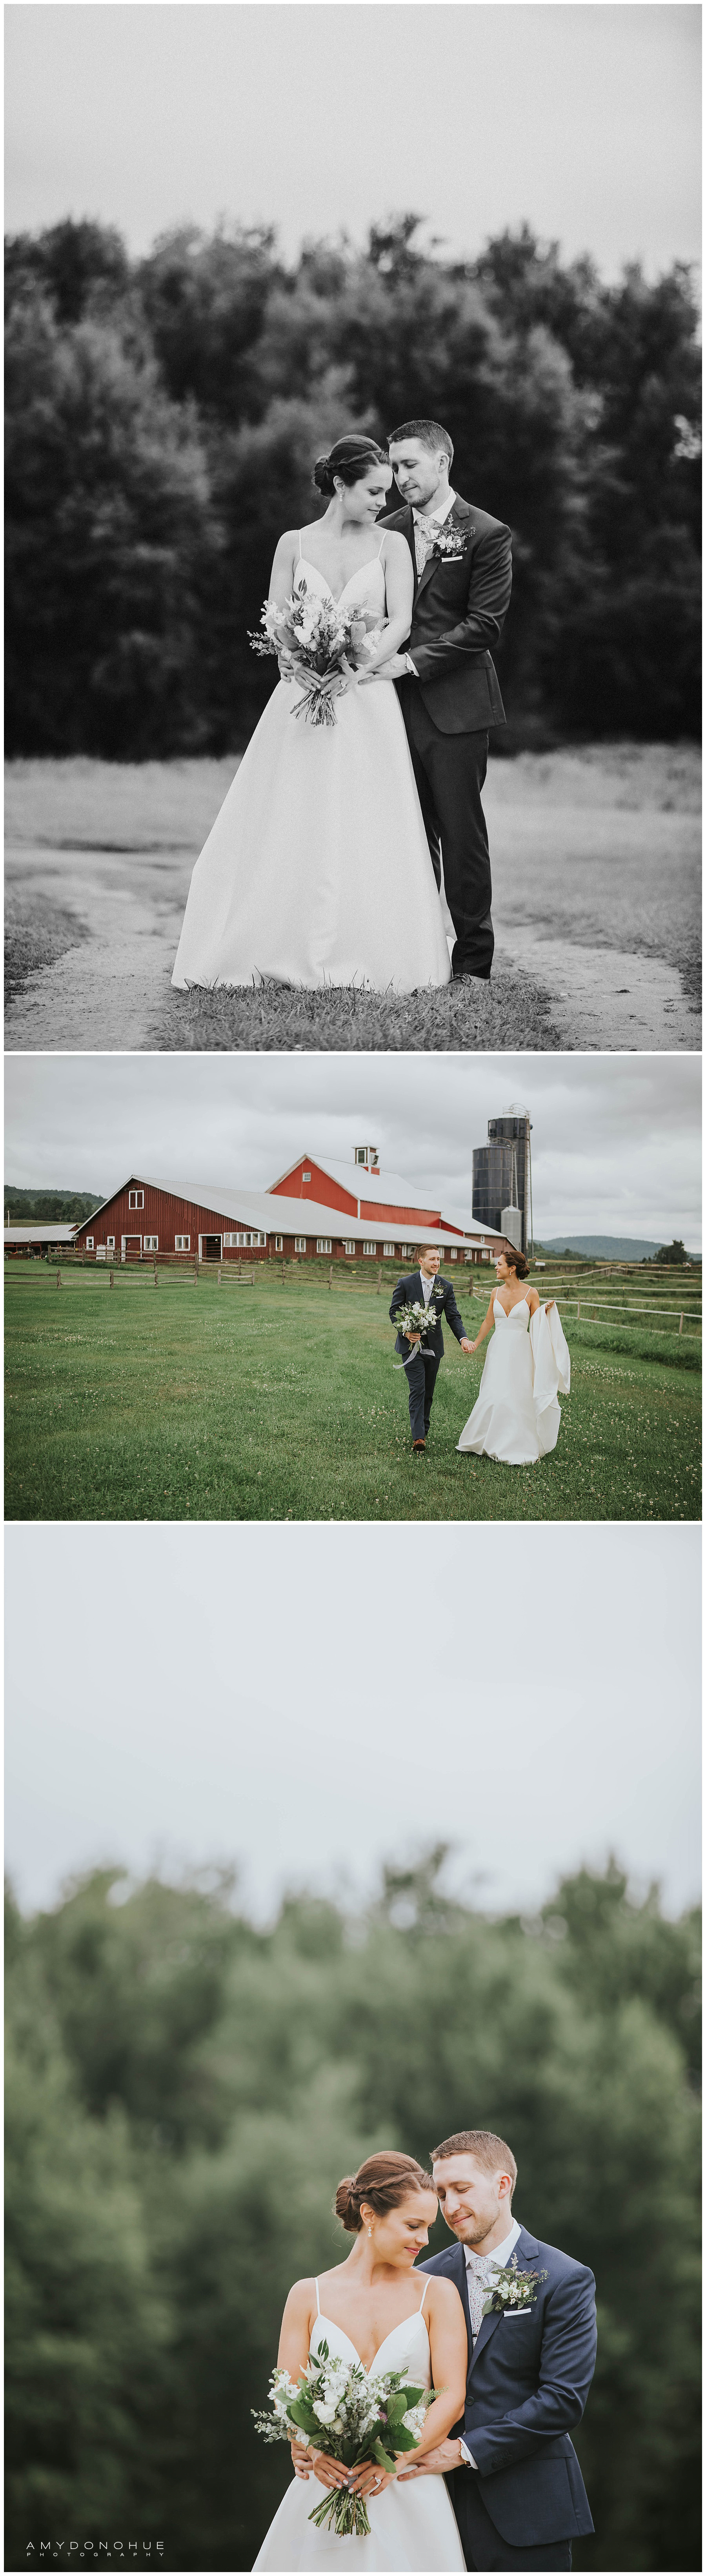 Bride and Groom Portraits | The Barn at Boyden Farms | Vermont Wedding Photographer | © Amy Donohue Photography